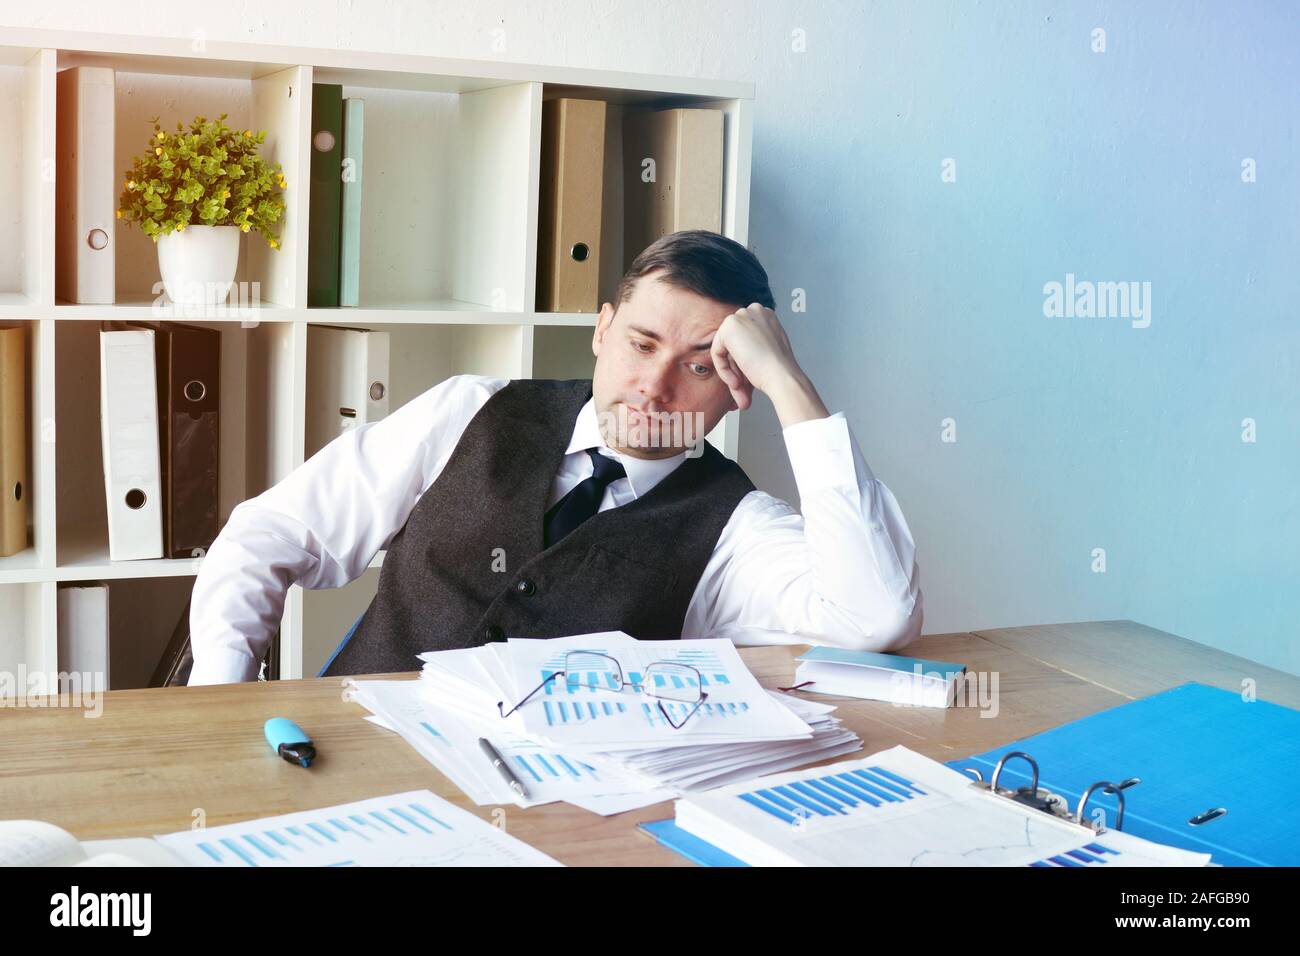 Overworked man with stack of business papers on the desk. Stock Photo